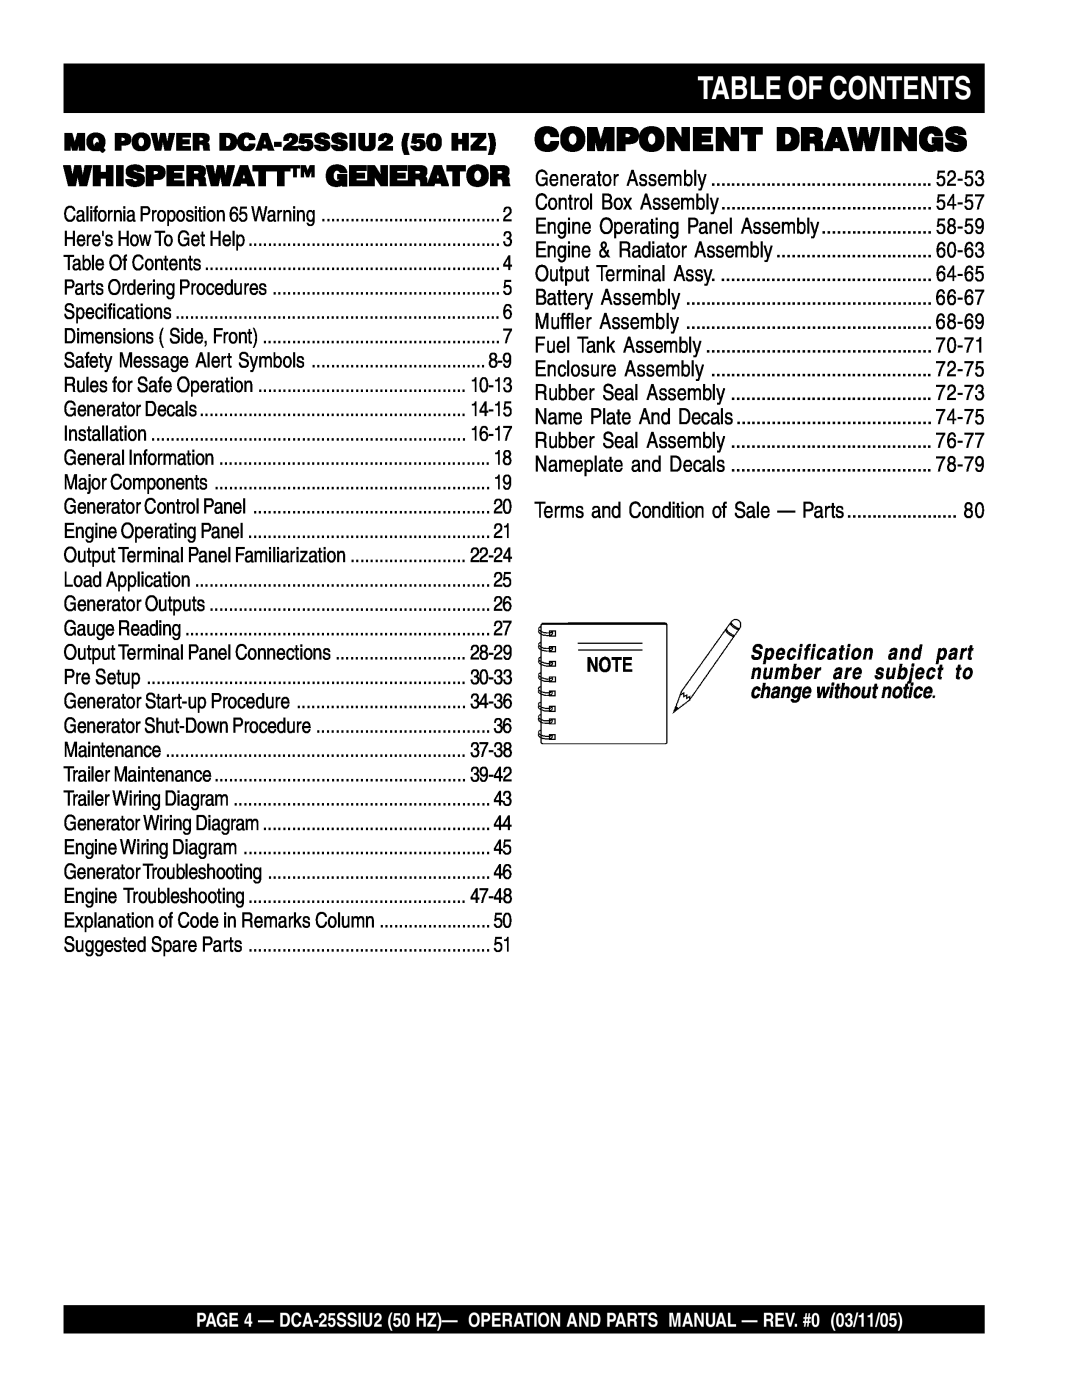 Multiquip DCA-25SSIU2 operation manual Table Of Contents, Whisperwatt Generator, Specification and part, Component Drawings 